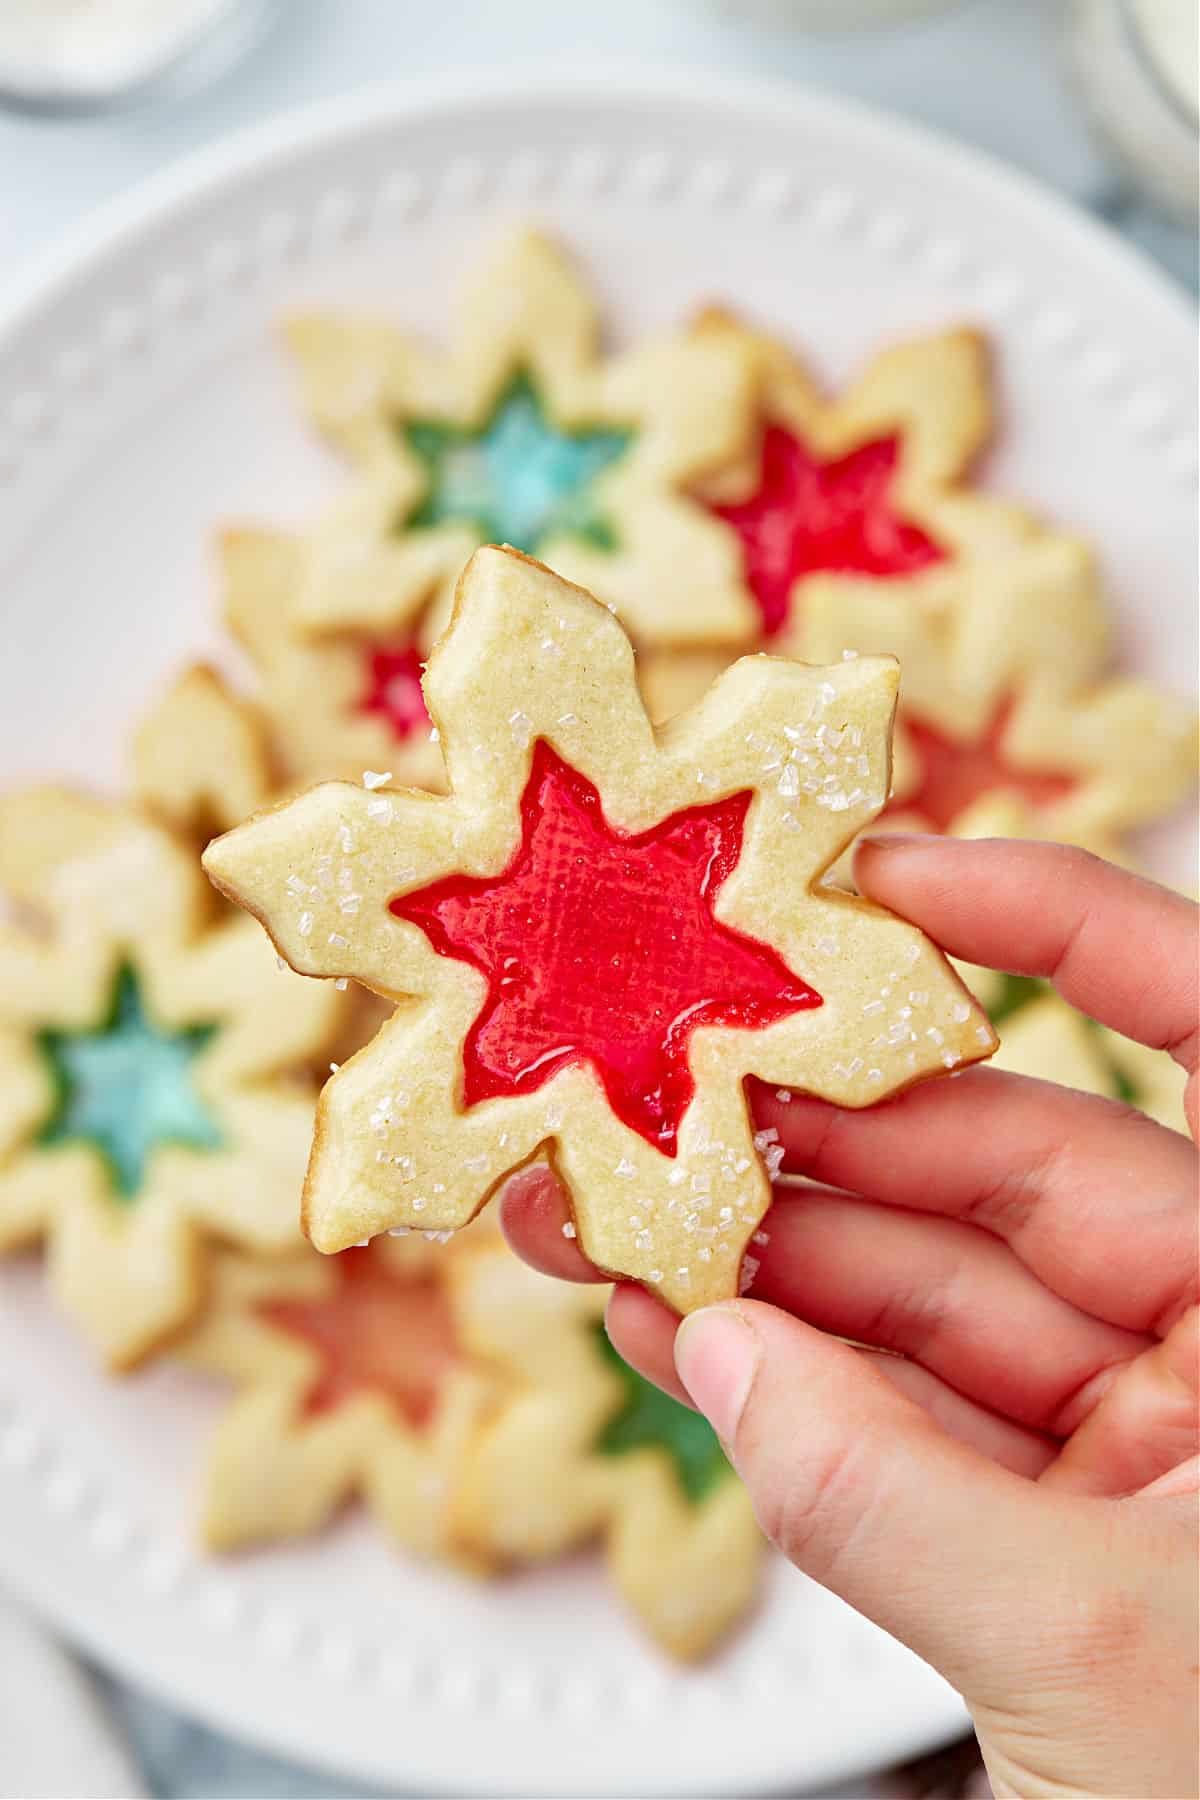 Star shaped stained glass cookies with red and green centers.